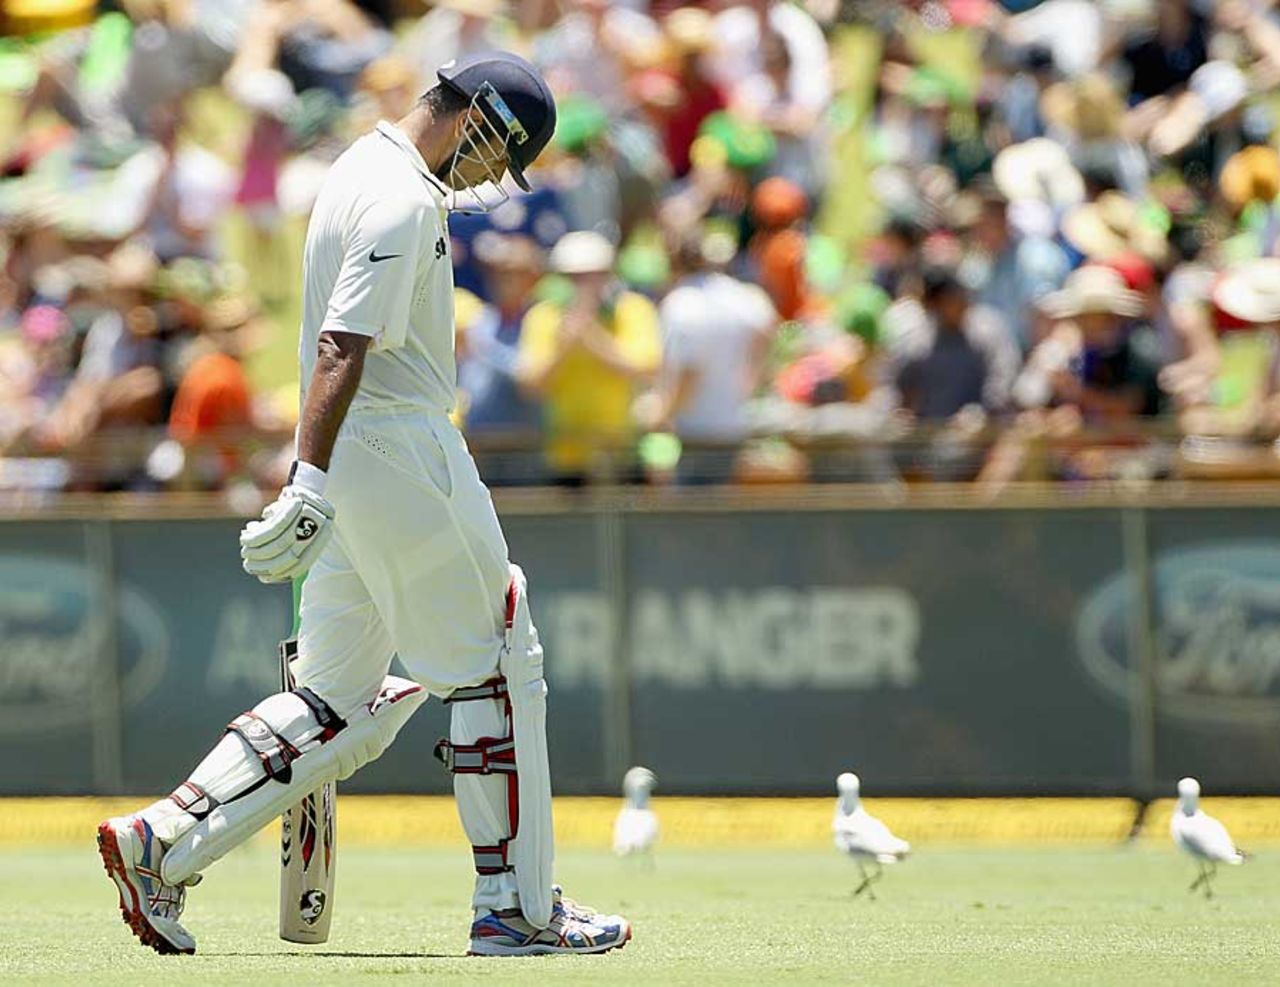 Rahul Dravid walks back after being dismissed, Australia v India, 3rd Test, Perth, 3rd day, January 15, 2012